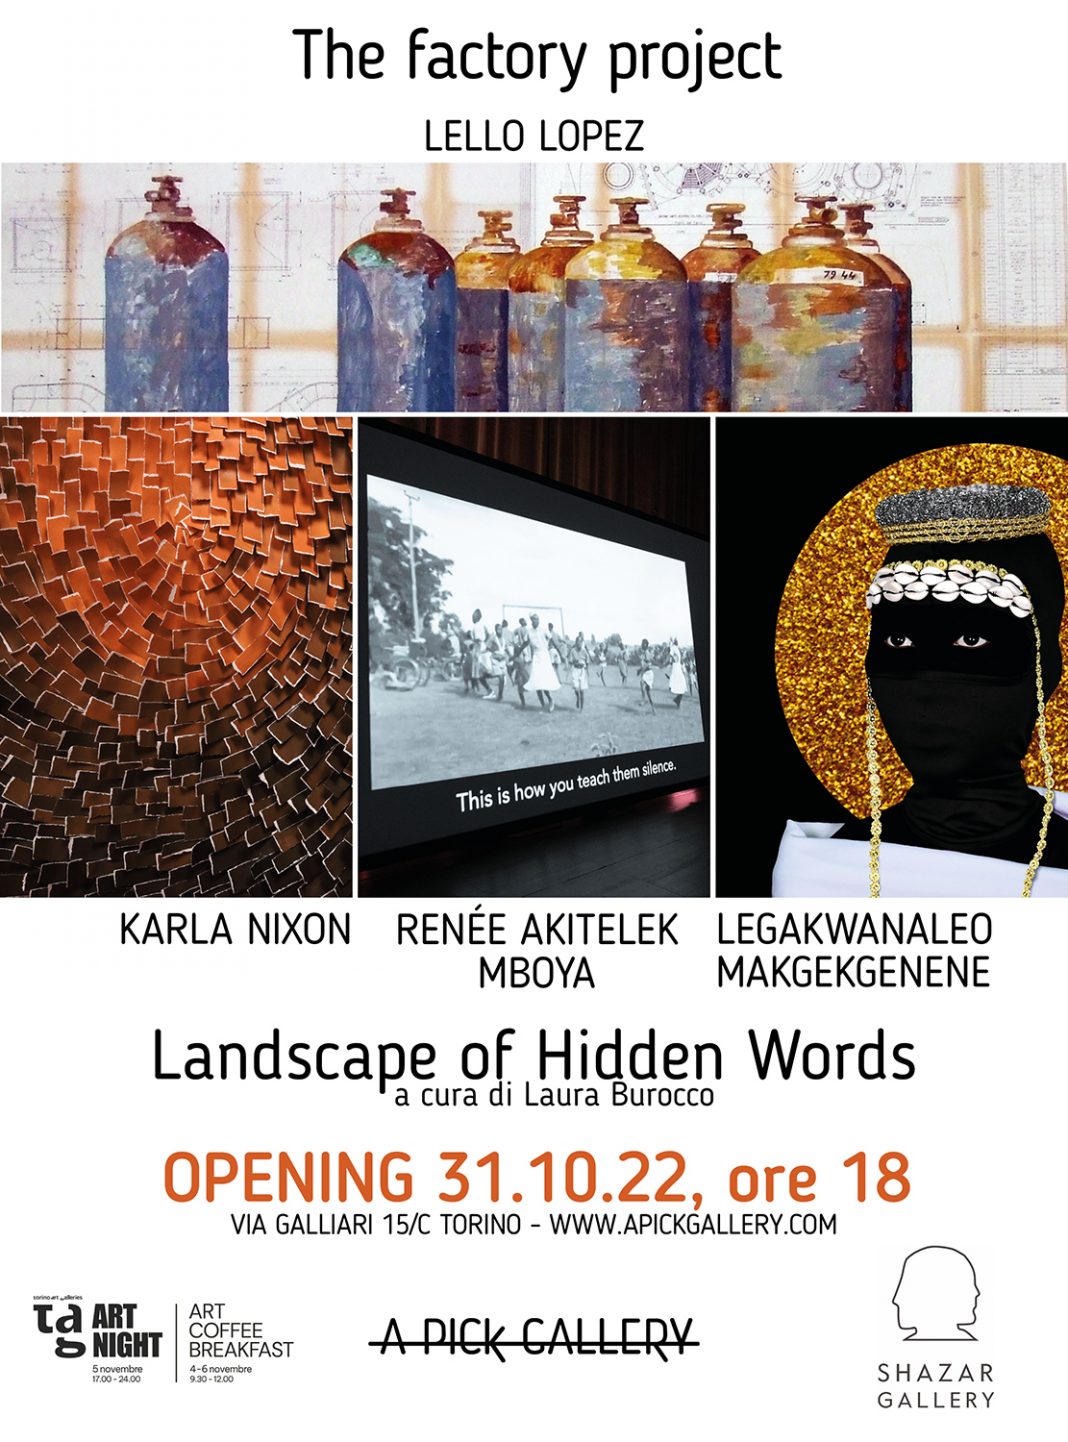 Landscapes of Hidden Words / The factory projecthttps://www.exibart.com/repository/media/formidable/11/img/38c/opening31oct_web-1068x1442.jpg